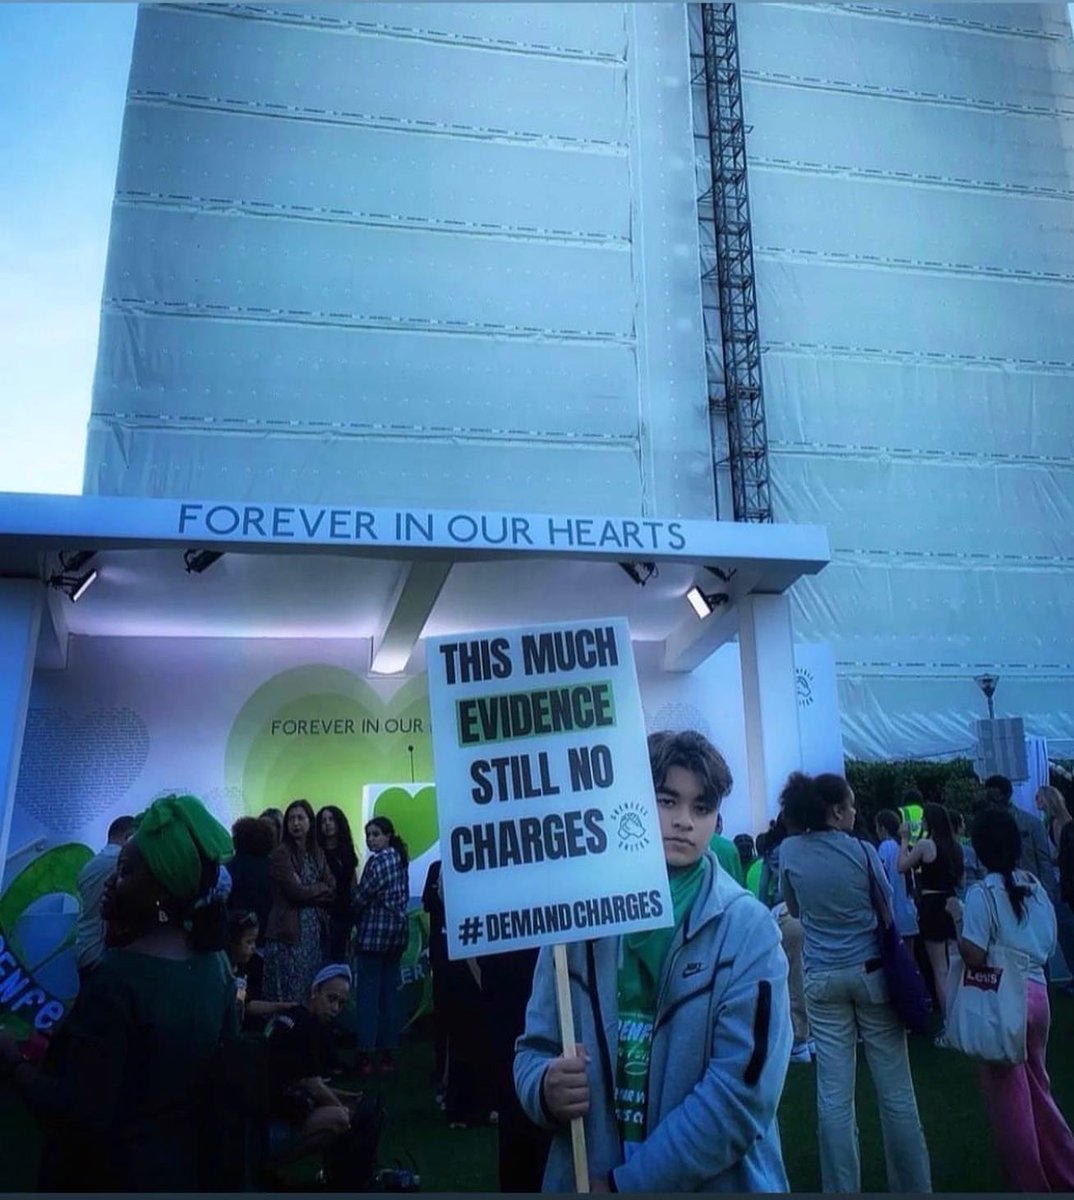 THIS MUCH EVIDENCE STILL NO CHARGES! 💚 #DemandCharges #Grenfell #Justice #CorporateGreedKills